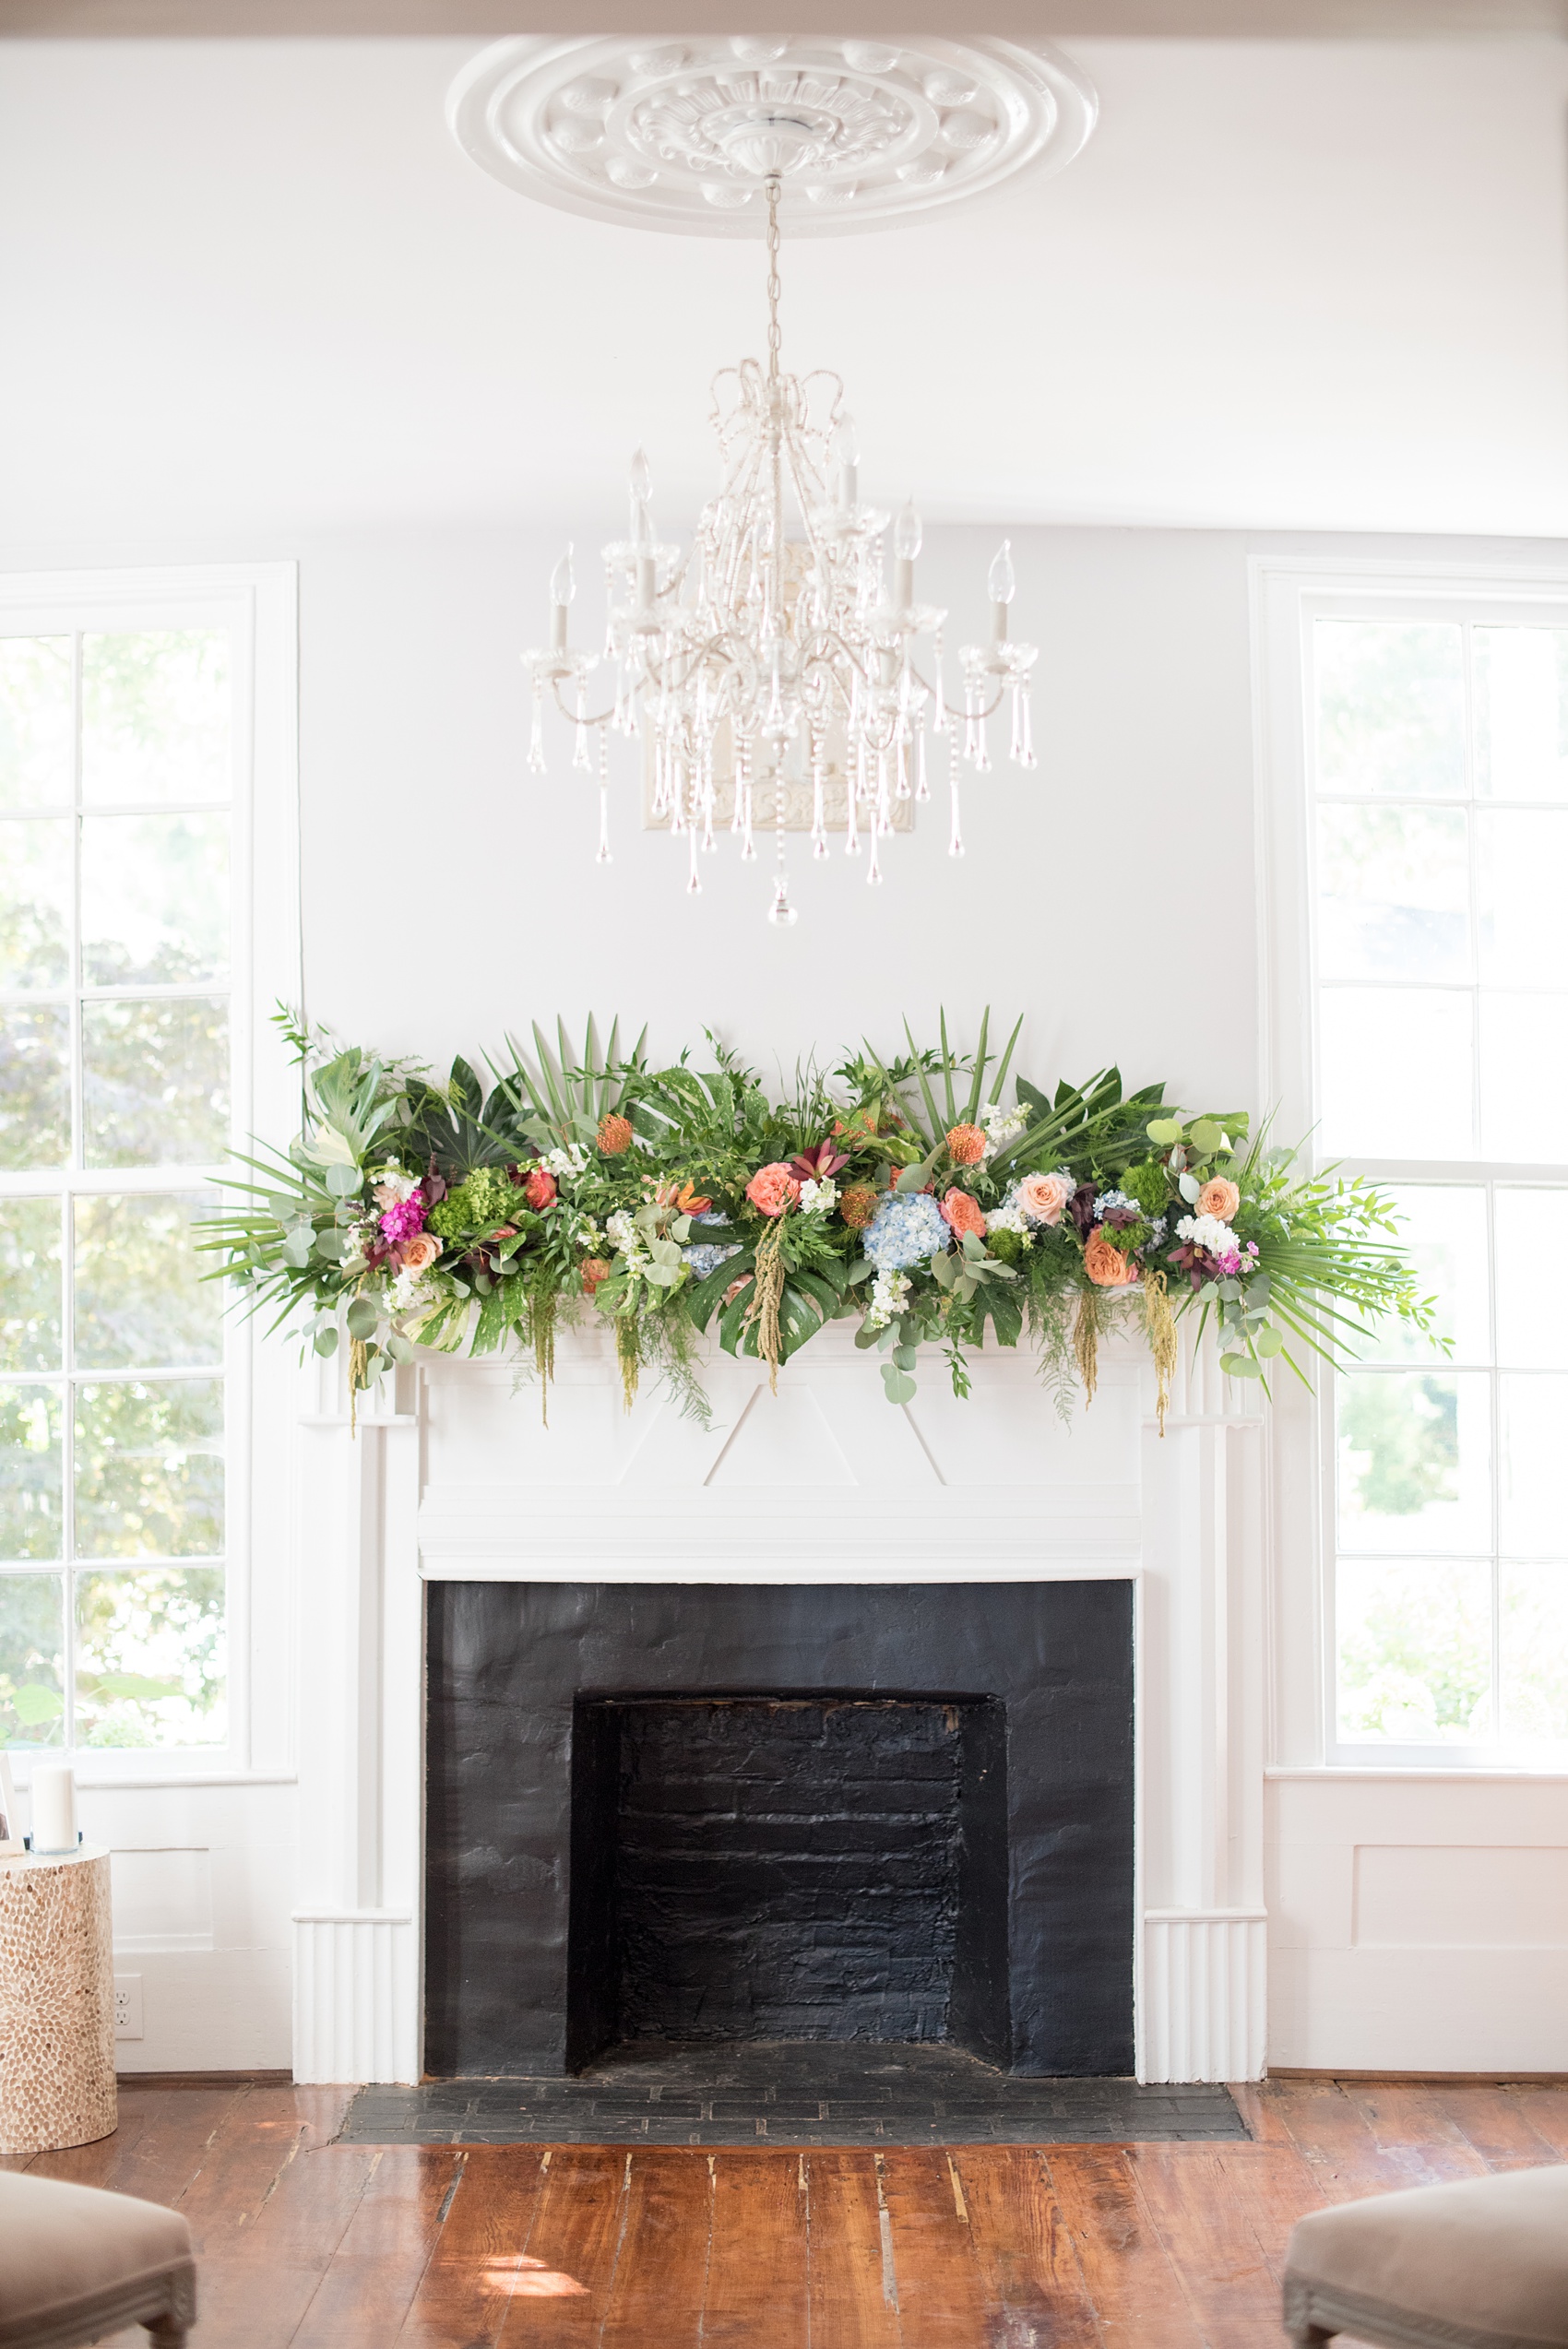 Mikkel Paige Photography pictures of a wedding at Leslie-Alford Mim's House in North Carolina for a Mad Dash Weddings event. Photo of the small elopement ceremony setup inside the historic home with a tropical floral arrangement above the fireplace.